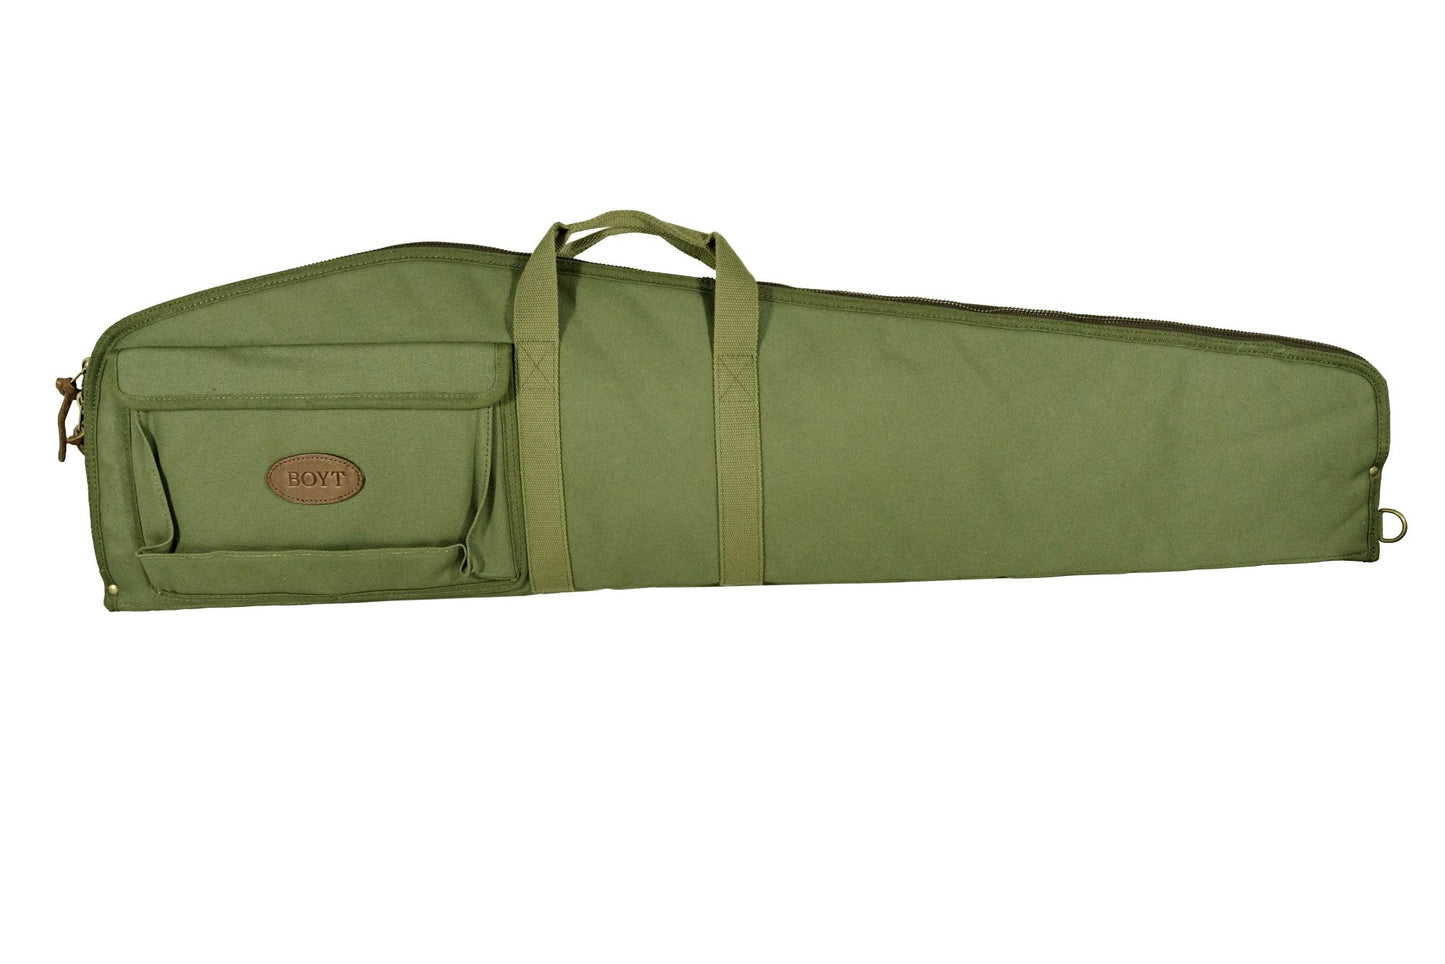 Bipod Rifle Case With Accessory Pocket